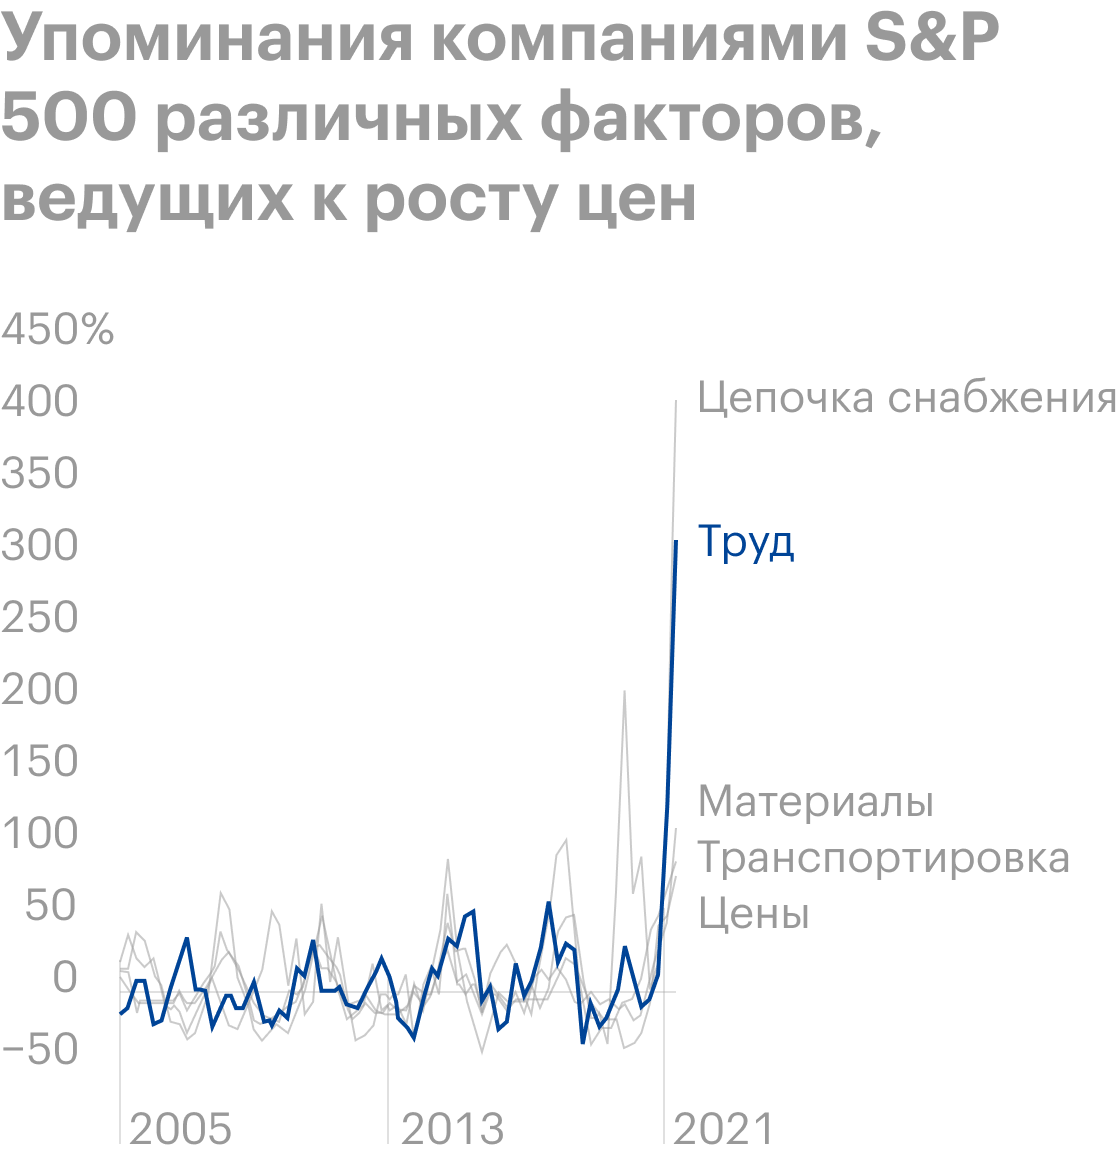 Источник: Daily Shot, Public firms increasingly mention supply and labor issues on earnings calls